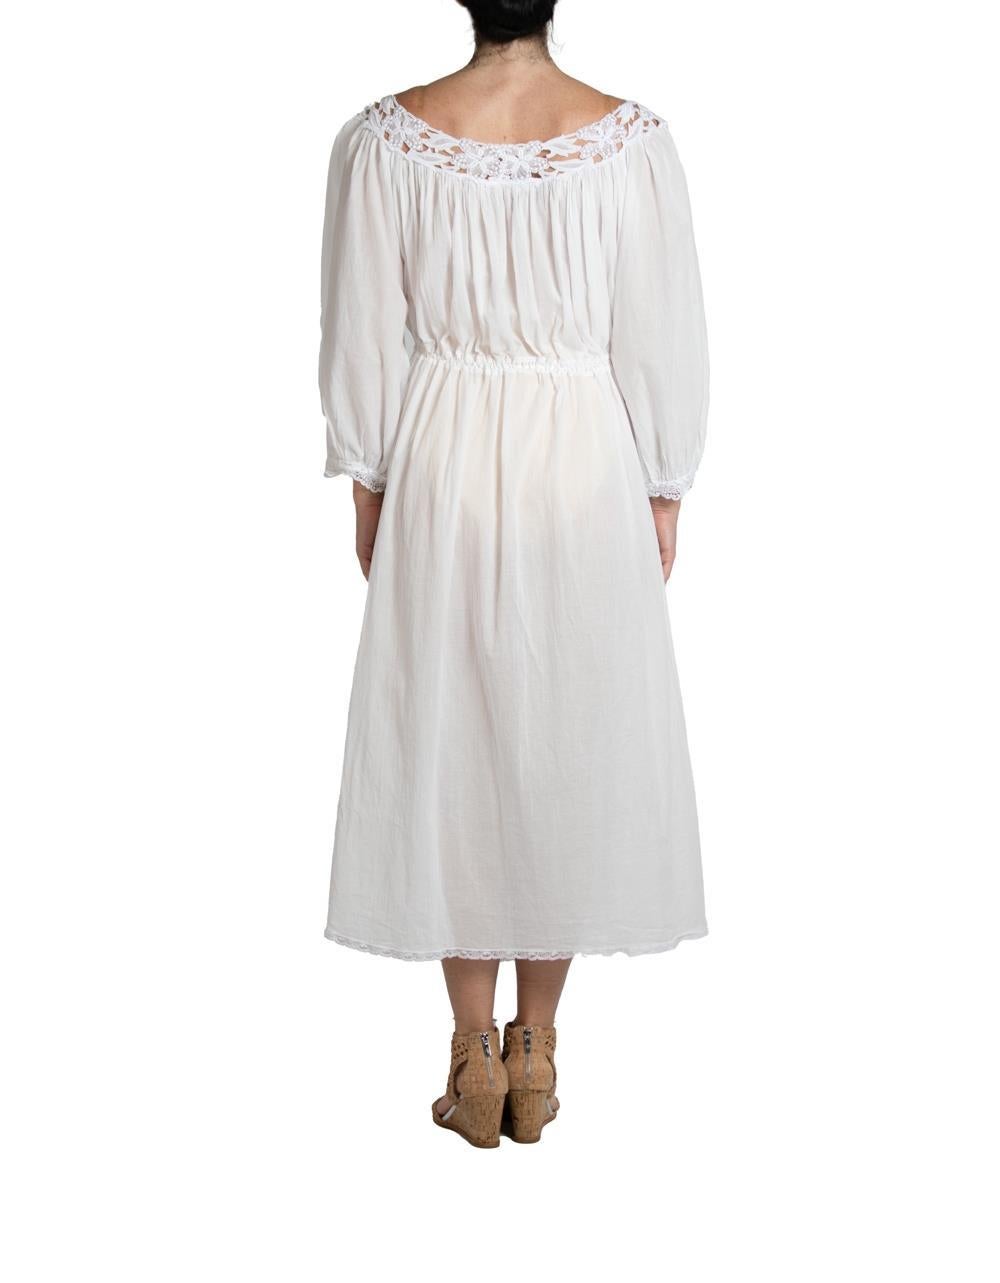 1970S White Cotton Lace Victorian Style Dress With Drawstring Waist For Sale 3